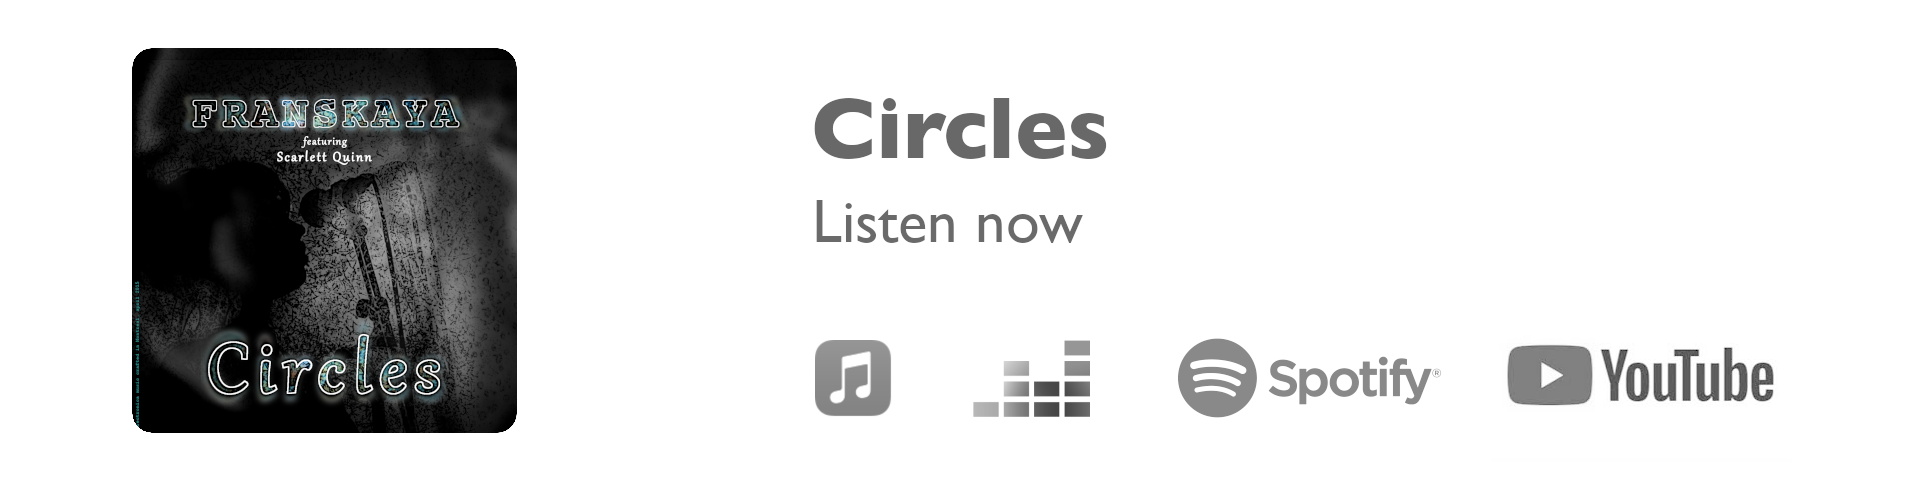 Clic to play Circles in the streaming platform of your choice